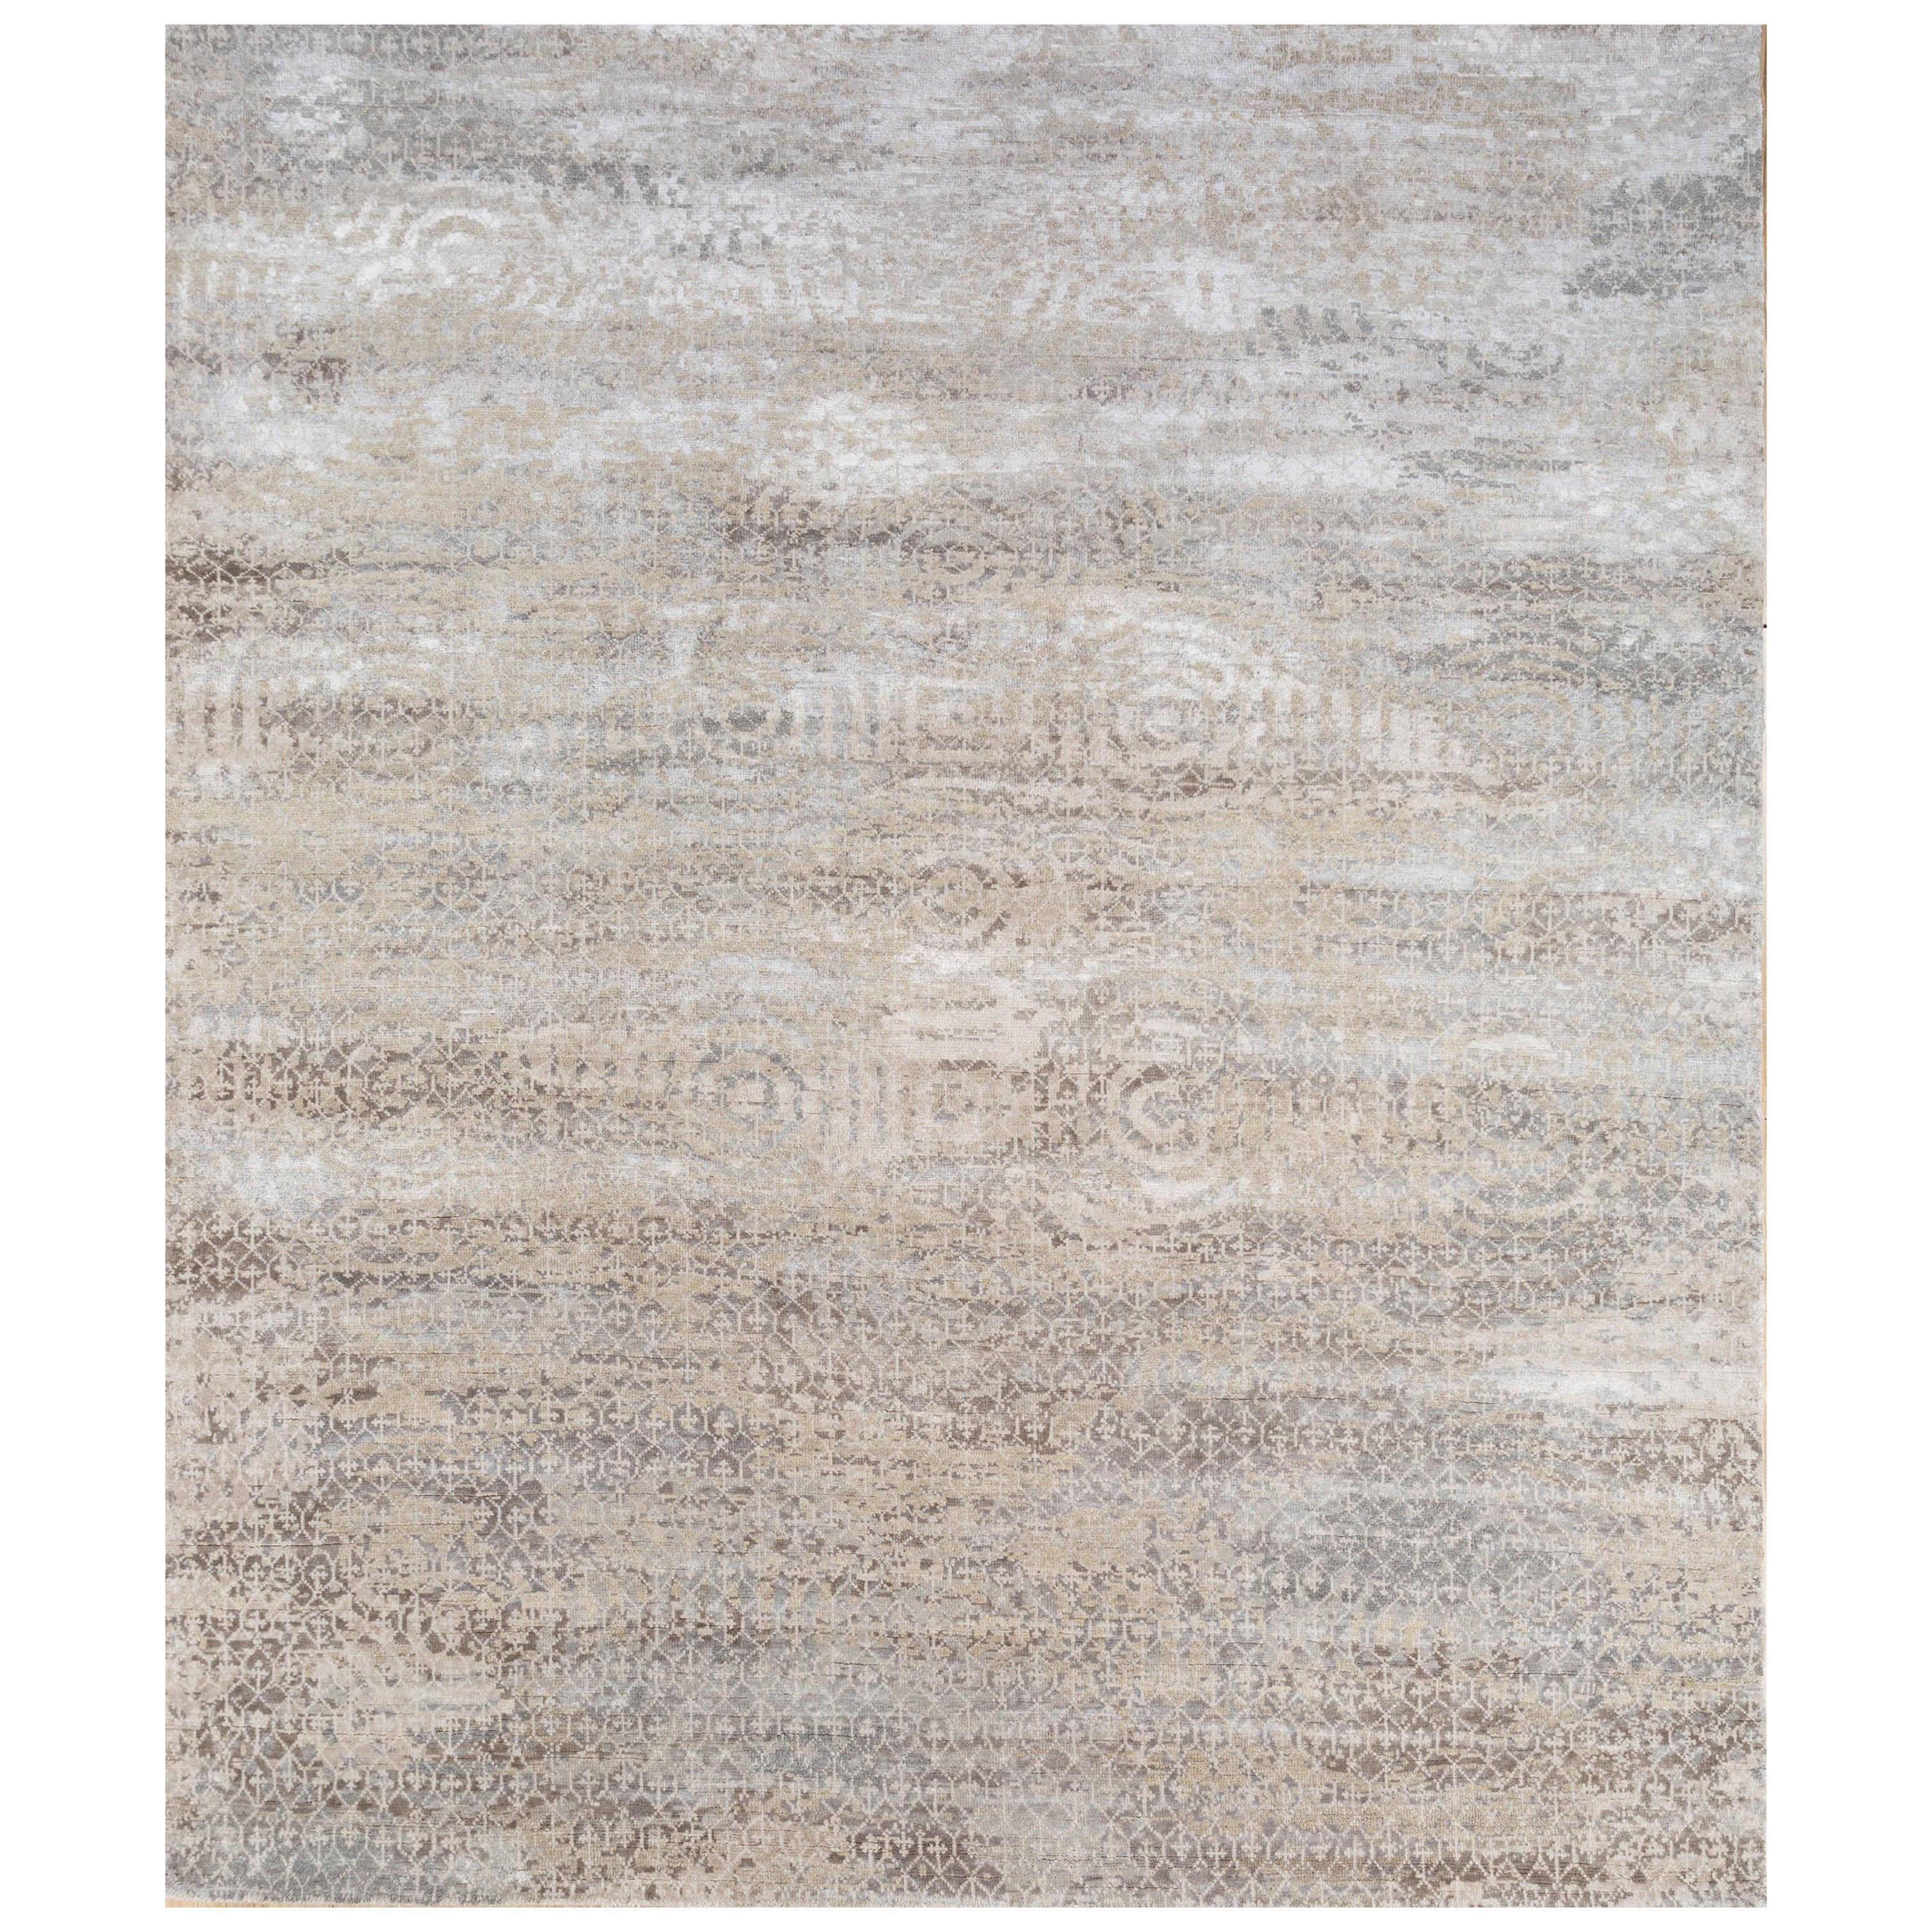 Misty Dawn Antique White & Shale 240X300 cm Handknotted Rug For Sale